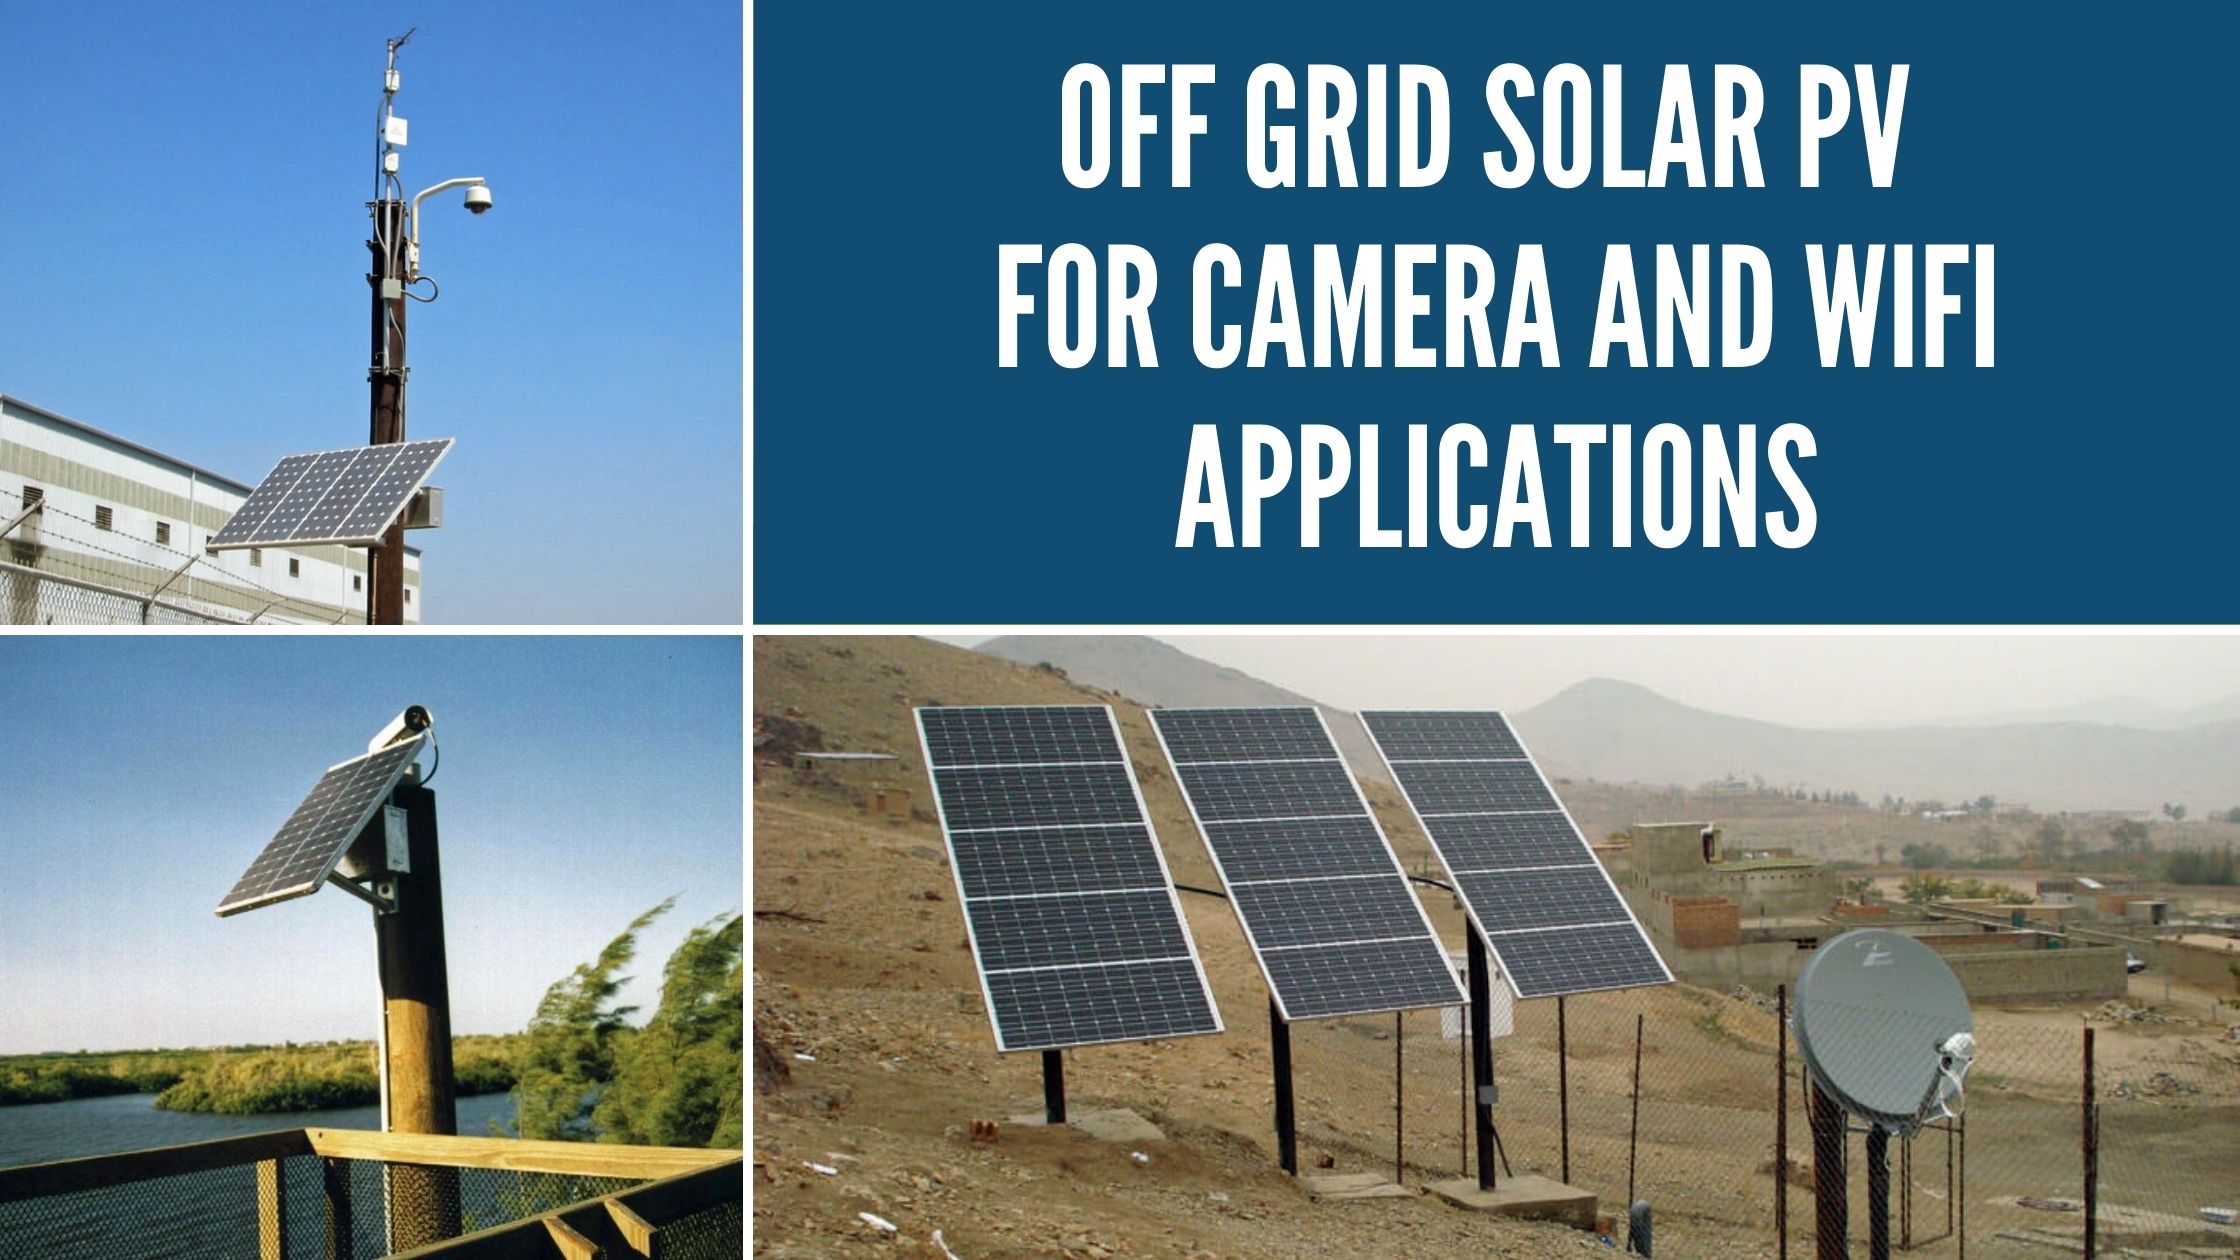 Off Grid Solar PV for Camera and WiFi Applications